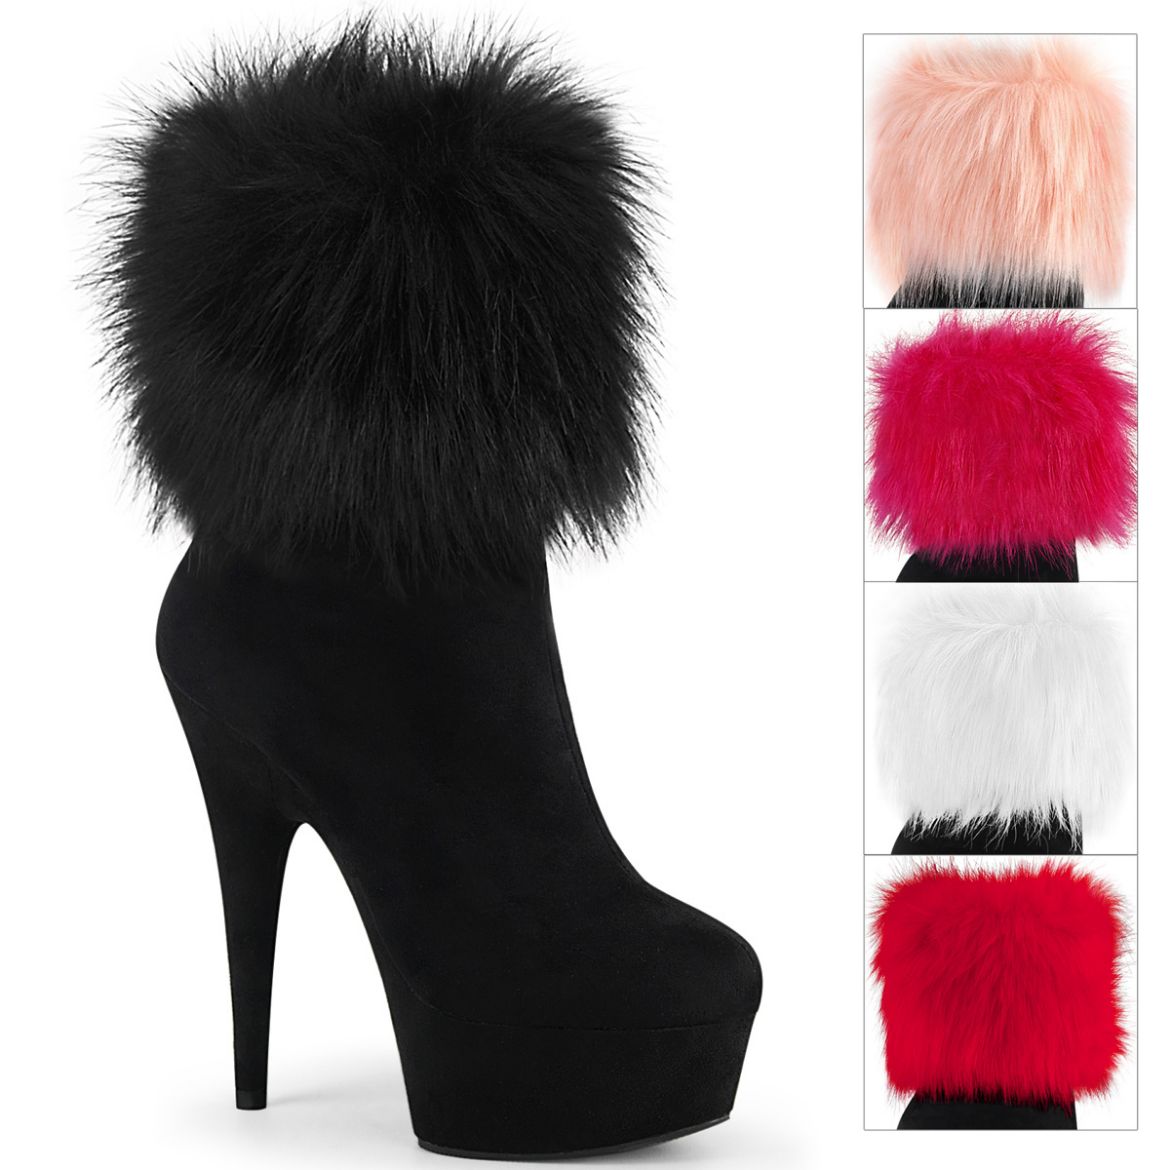 Product image of Pleaser DELIGHT-1000 Black Faux Suede/Black Faux Suede 6 inch (15.2 cm) Heel 1 3/4 inch (4.5 cm) Platform Ankle Bootie With Faux Fur Cuffs Inside Zip